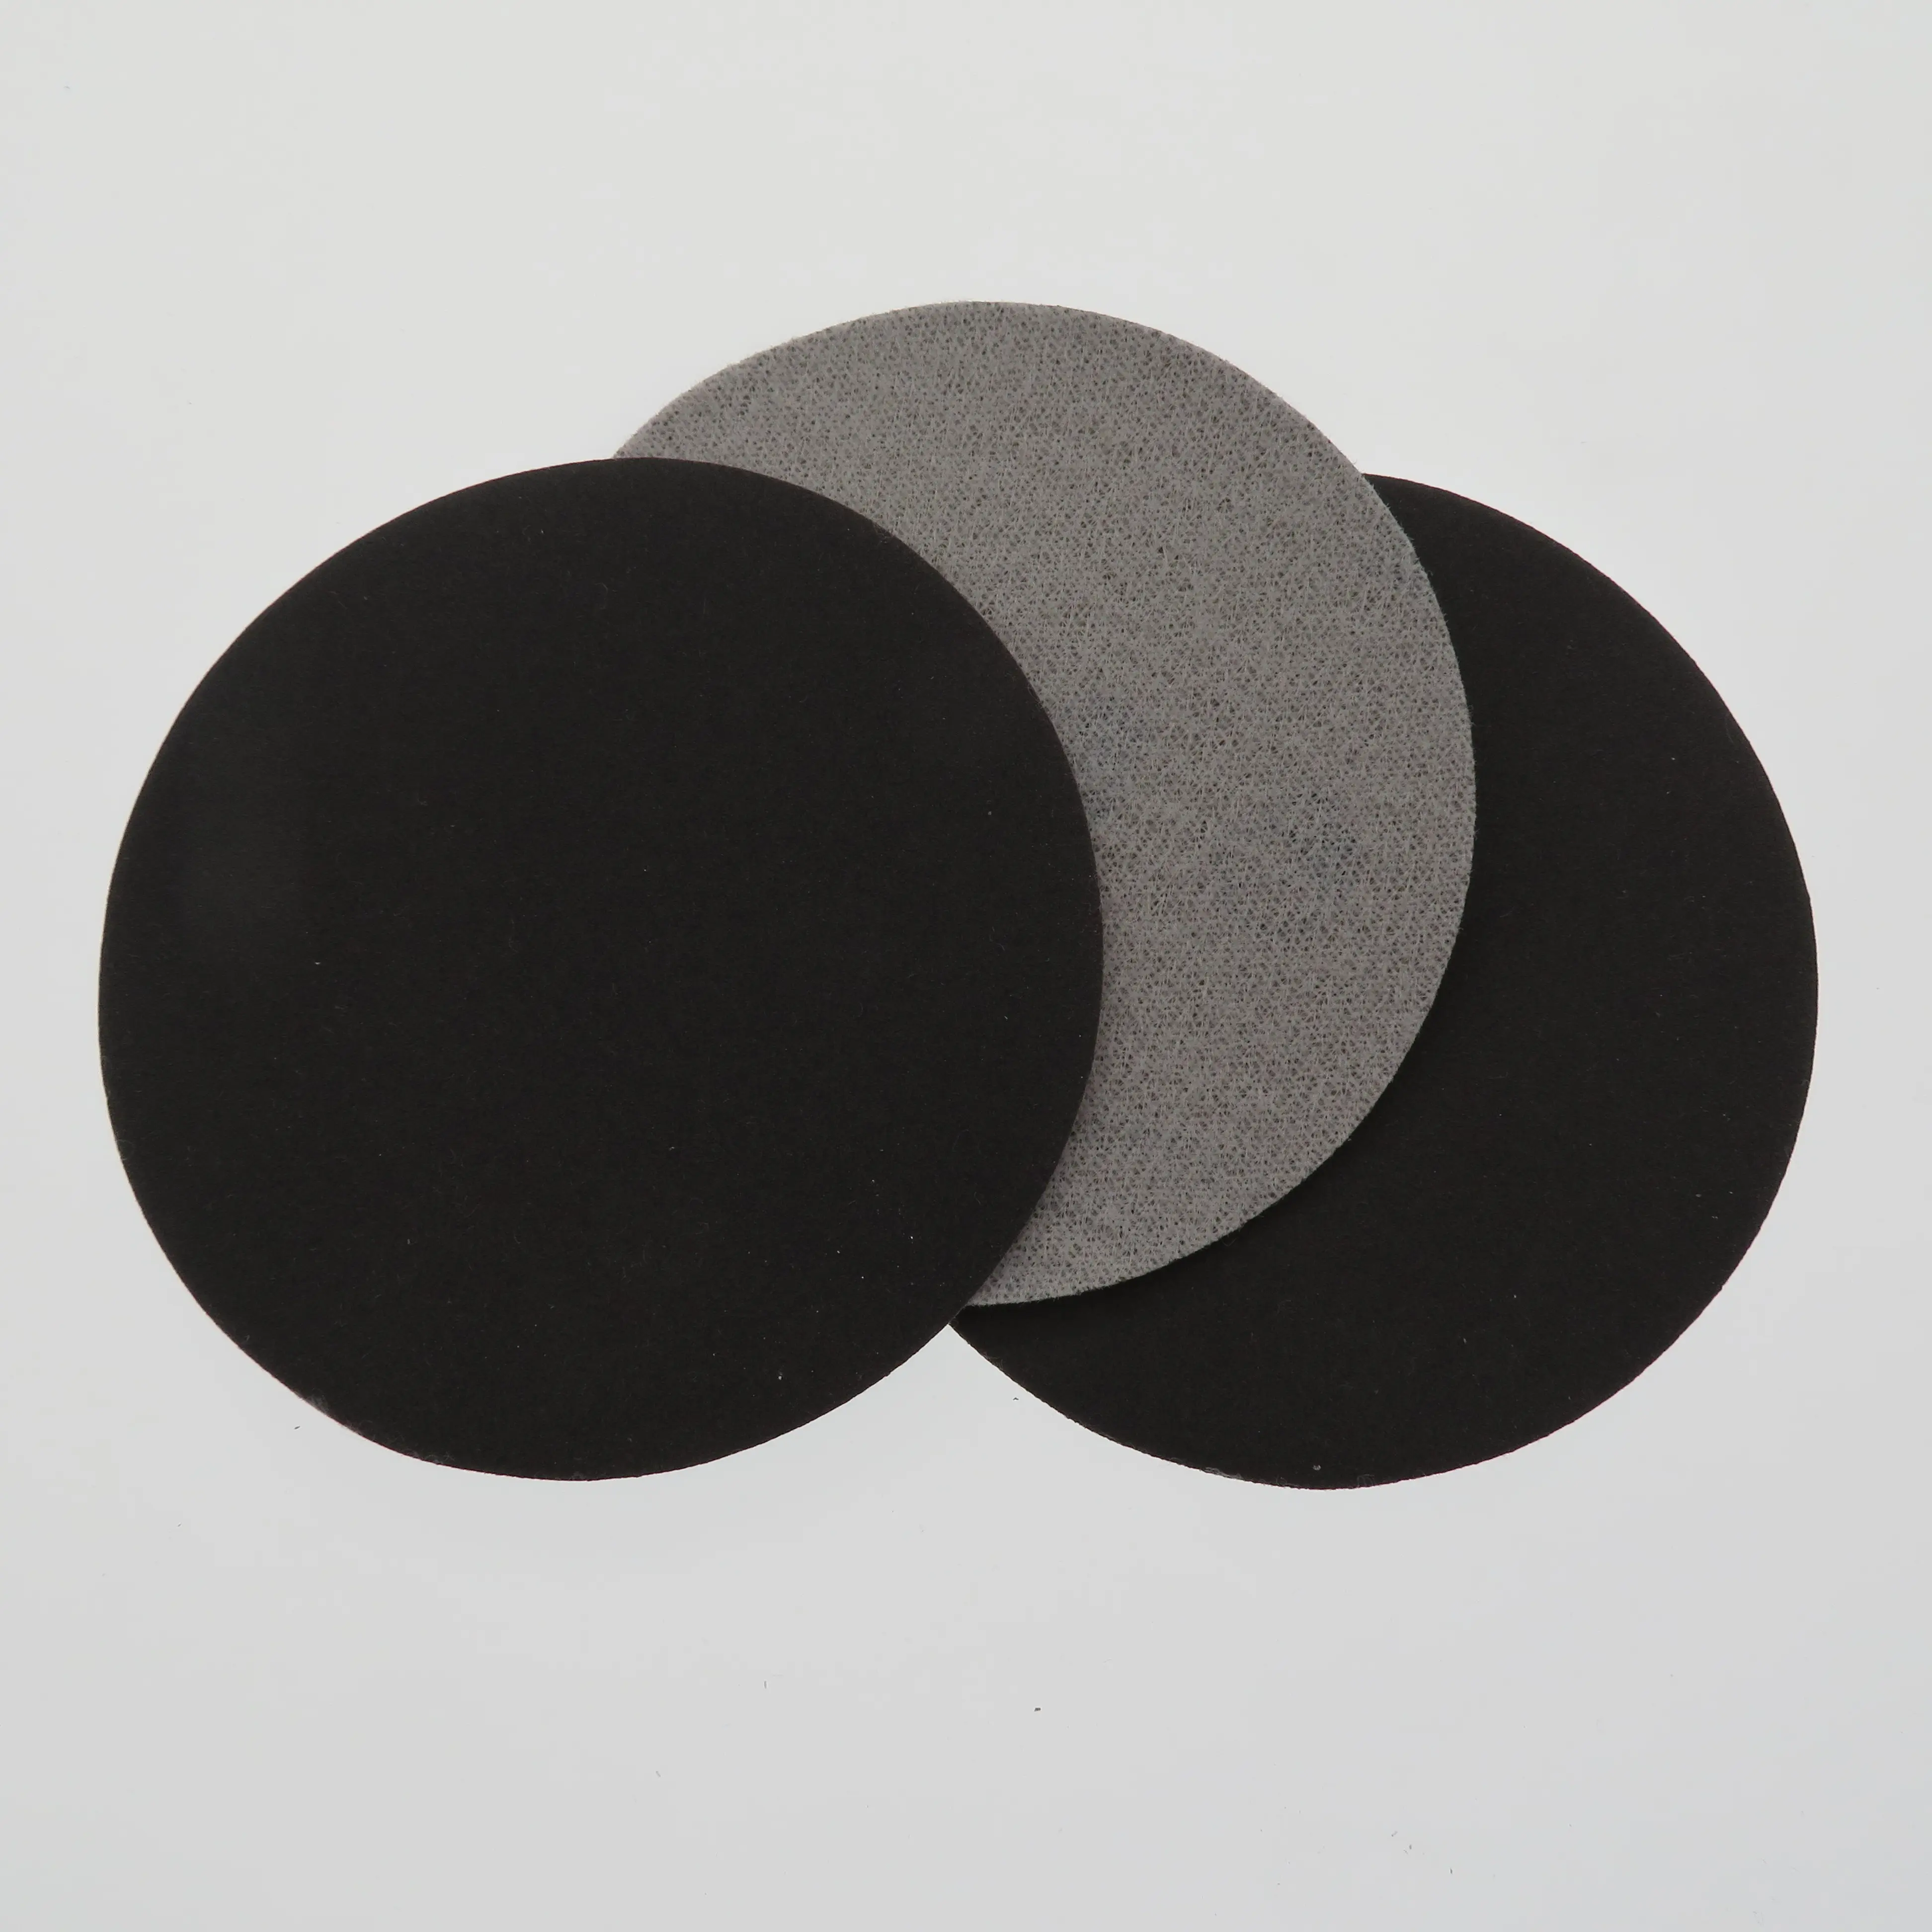 Buy 3Inch Silicon Carbide 60-1000 Grit Customized Round Wet & Dry Waterproof Abrasive/Sand Paper Sandpaper Sanding Disc